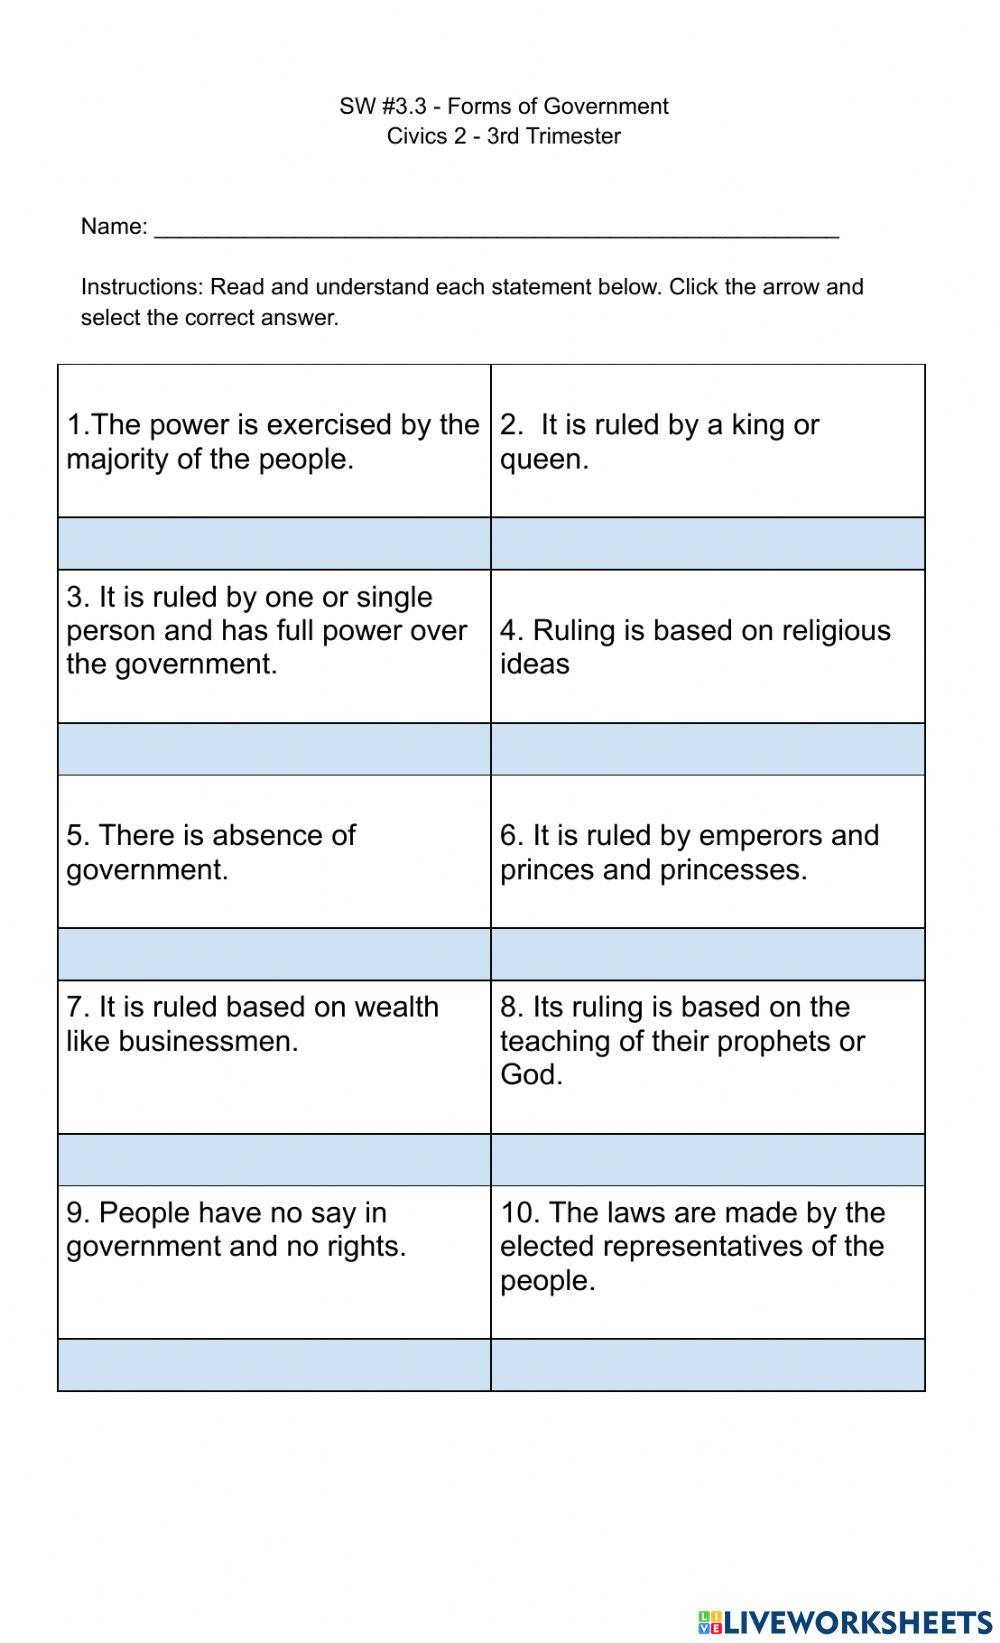 SW 3.3 Forms of Government